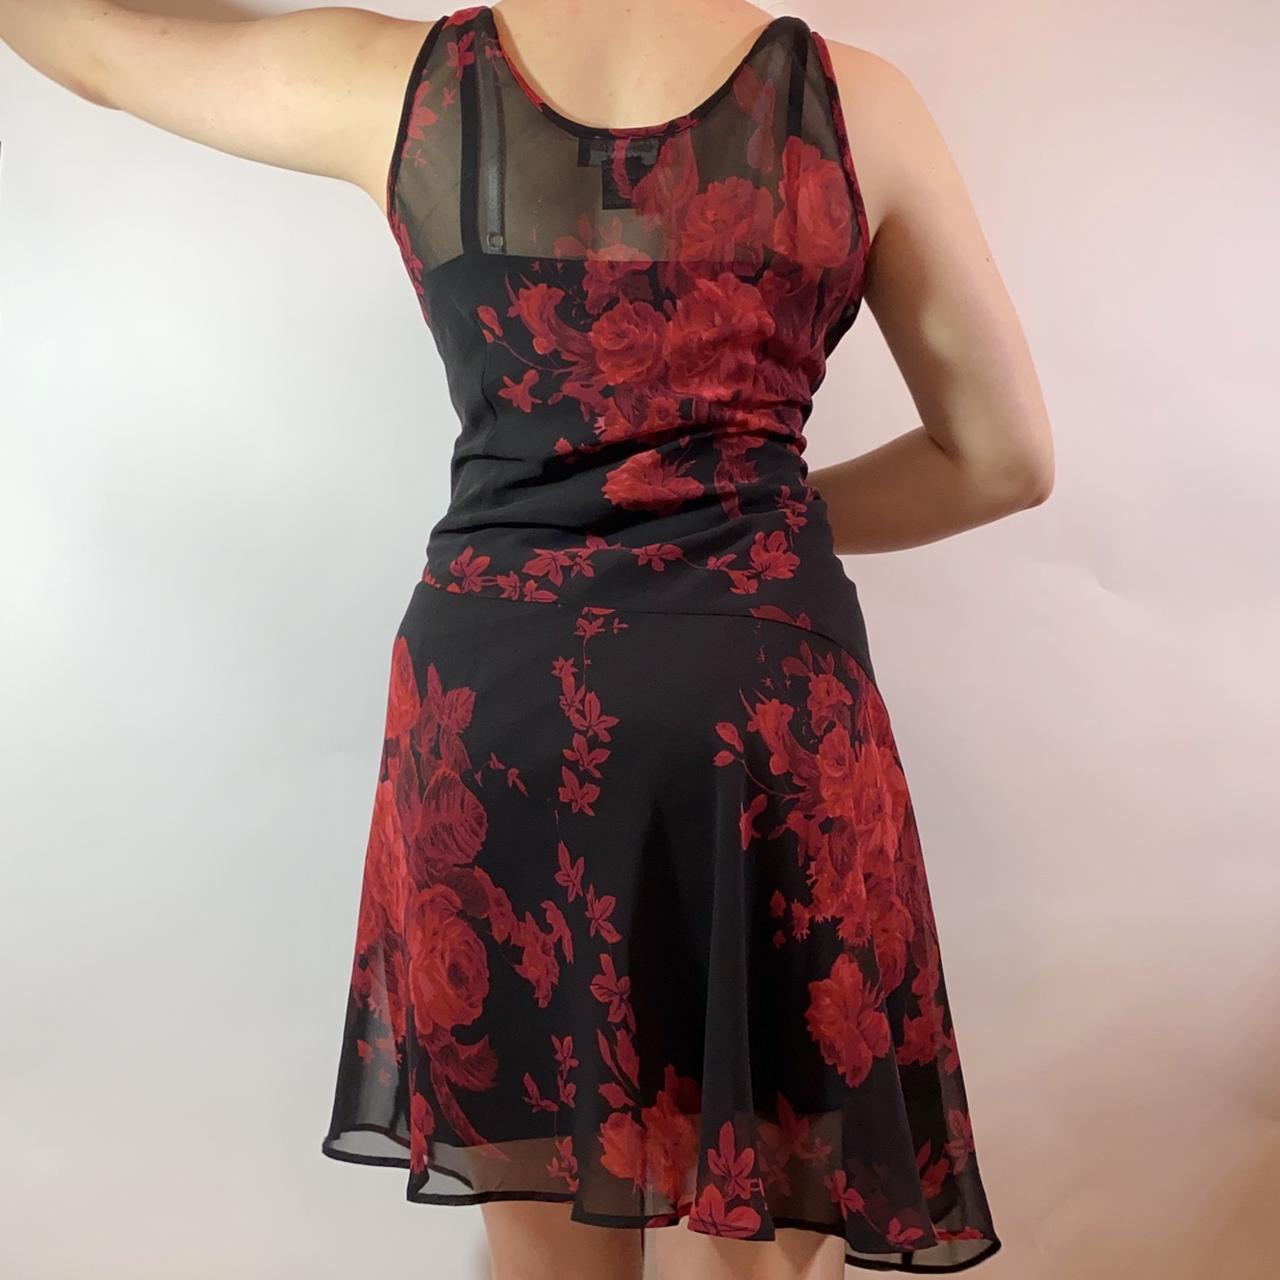 Women's Red and Black Dress (2)